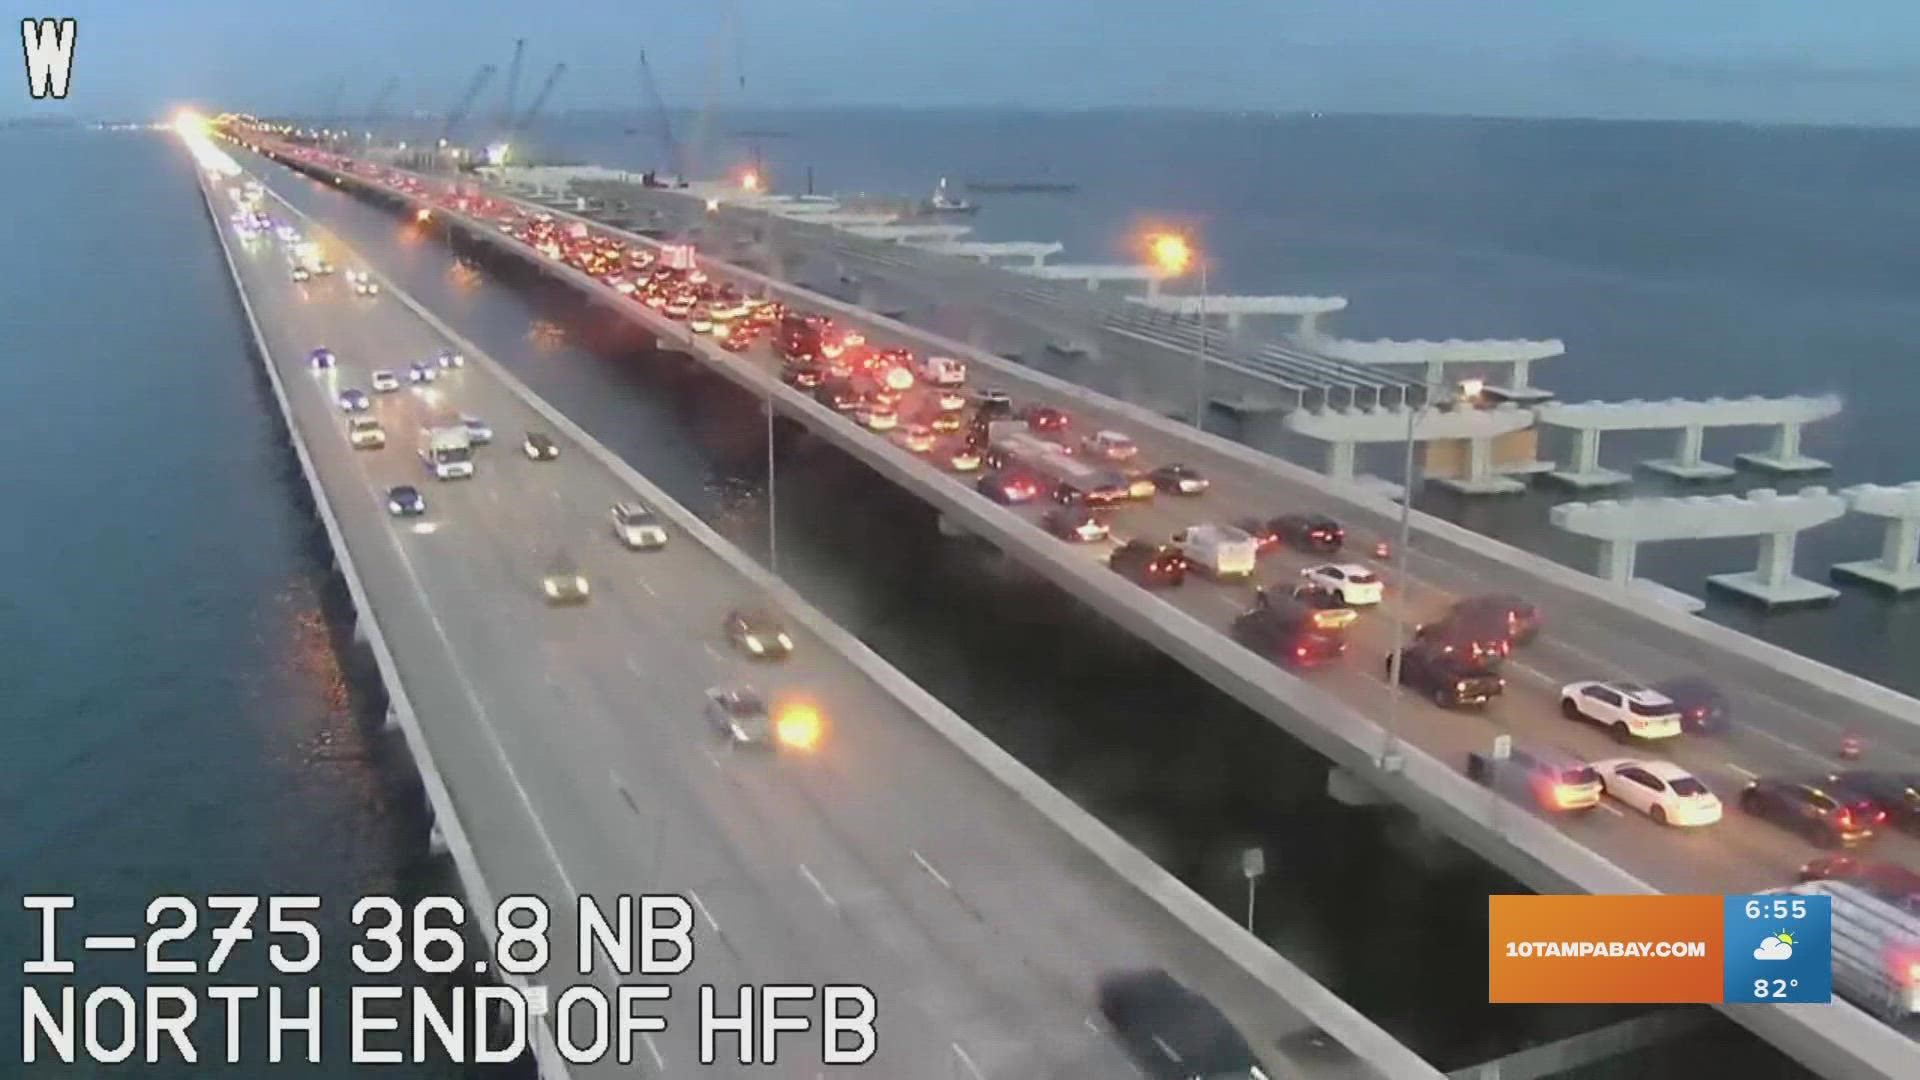 The aftermath of a car fire along the southbound lanes of Interstate 275 along the Howard Frankland Bridge is still causing major delays for commuters.